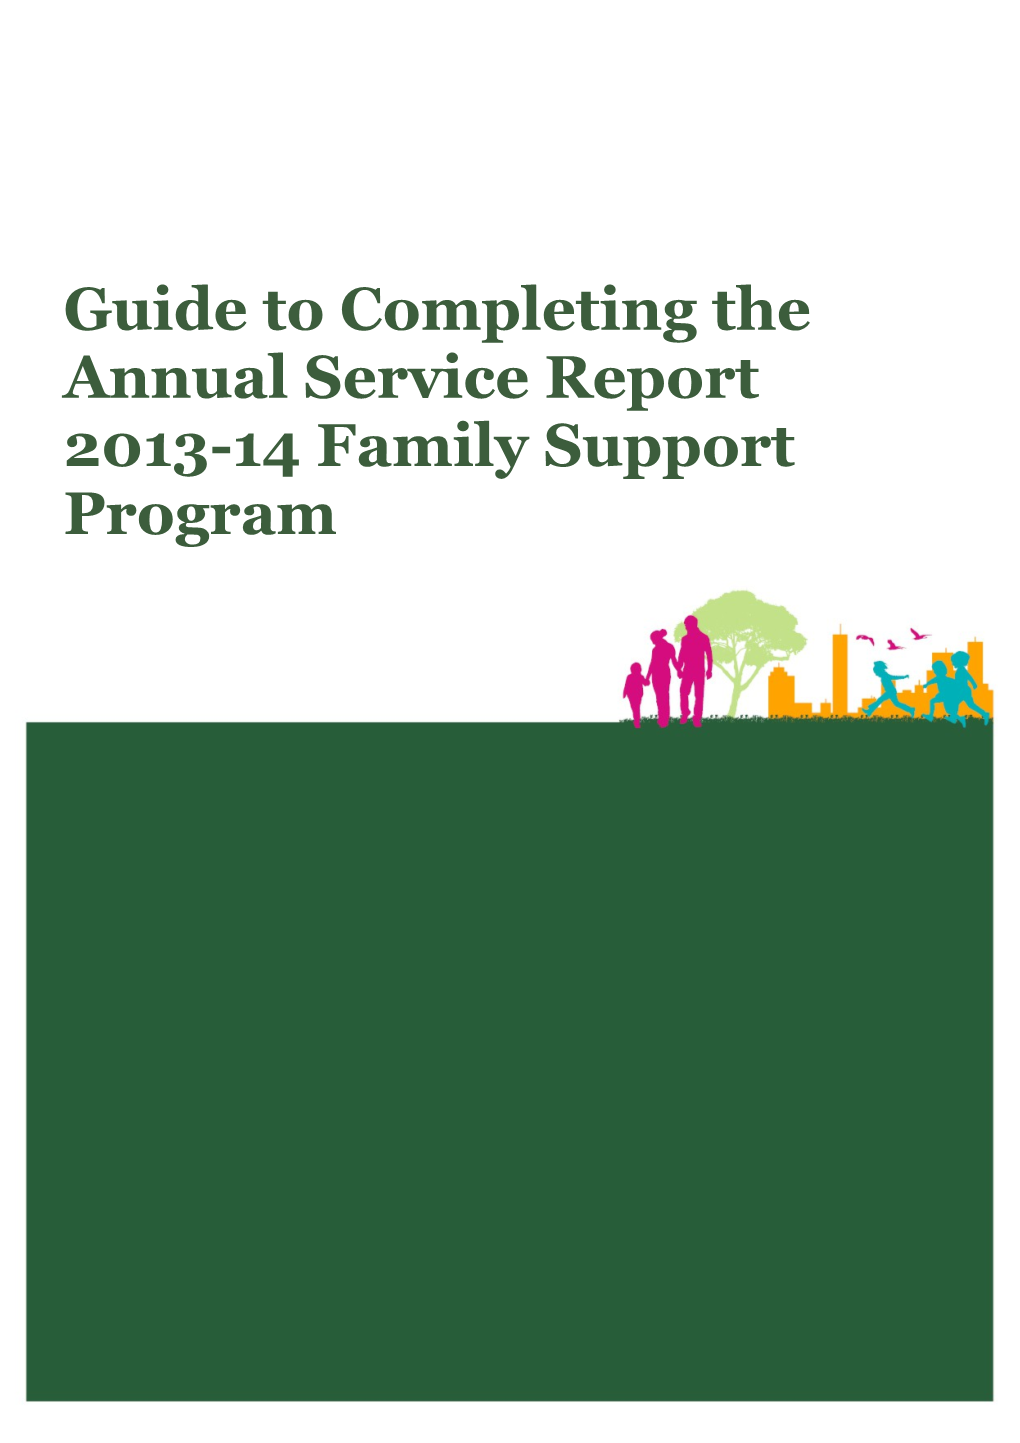 Guide to Completing the Annual Service Report 2013-14 Family Support Program